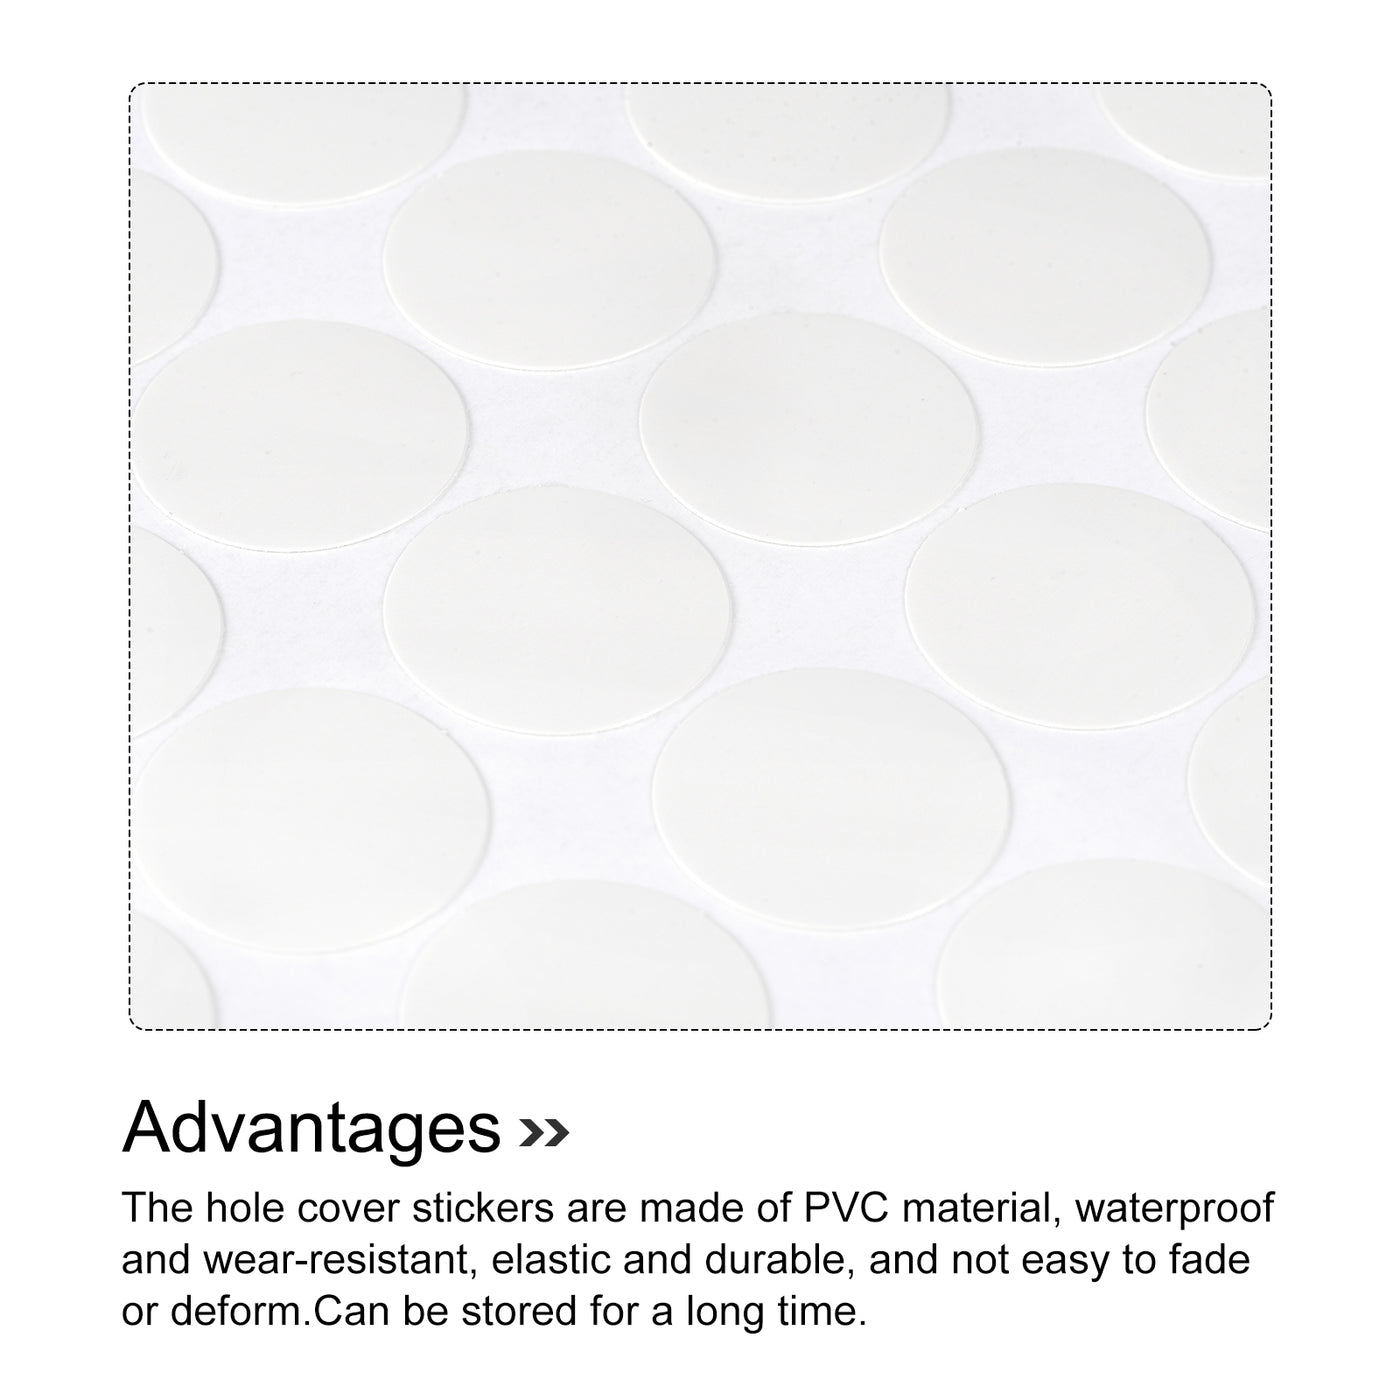 uxcell Uxcell Screw Hole Cover Stickers, 21mm Dia PVC Self Adhesive Covers Caps for Wood Furniture Cabinet Shelf Wardrobe, White 6 Sheet/324pcs